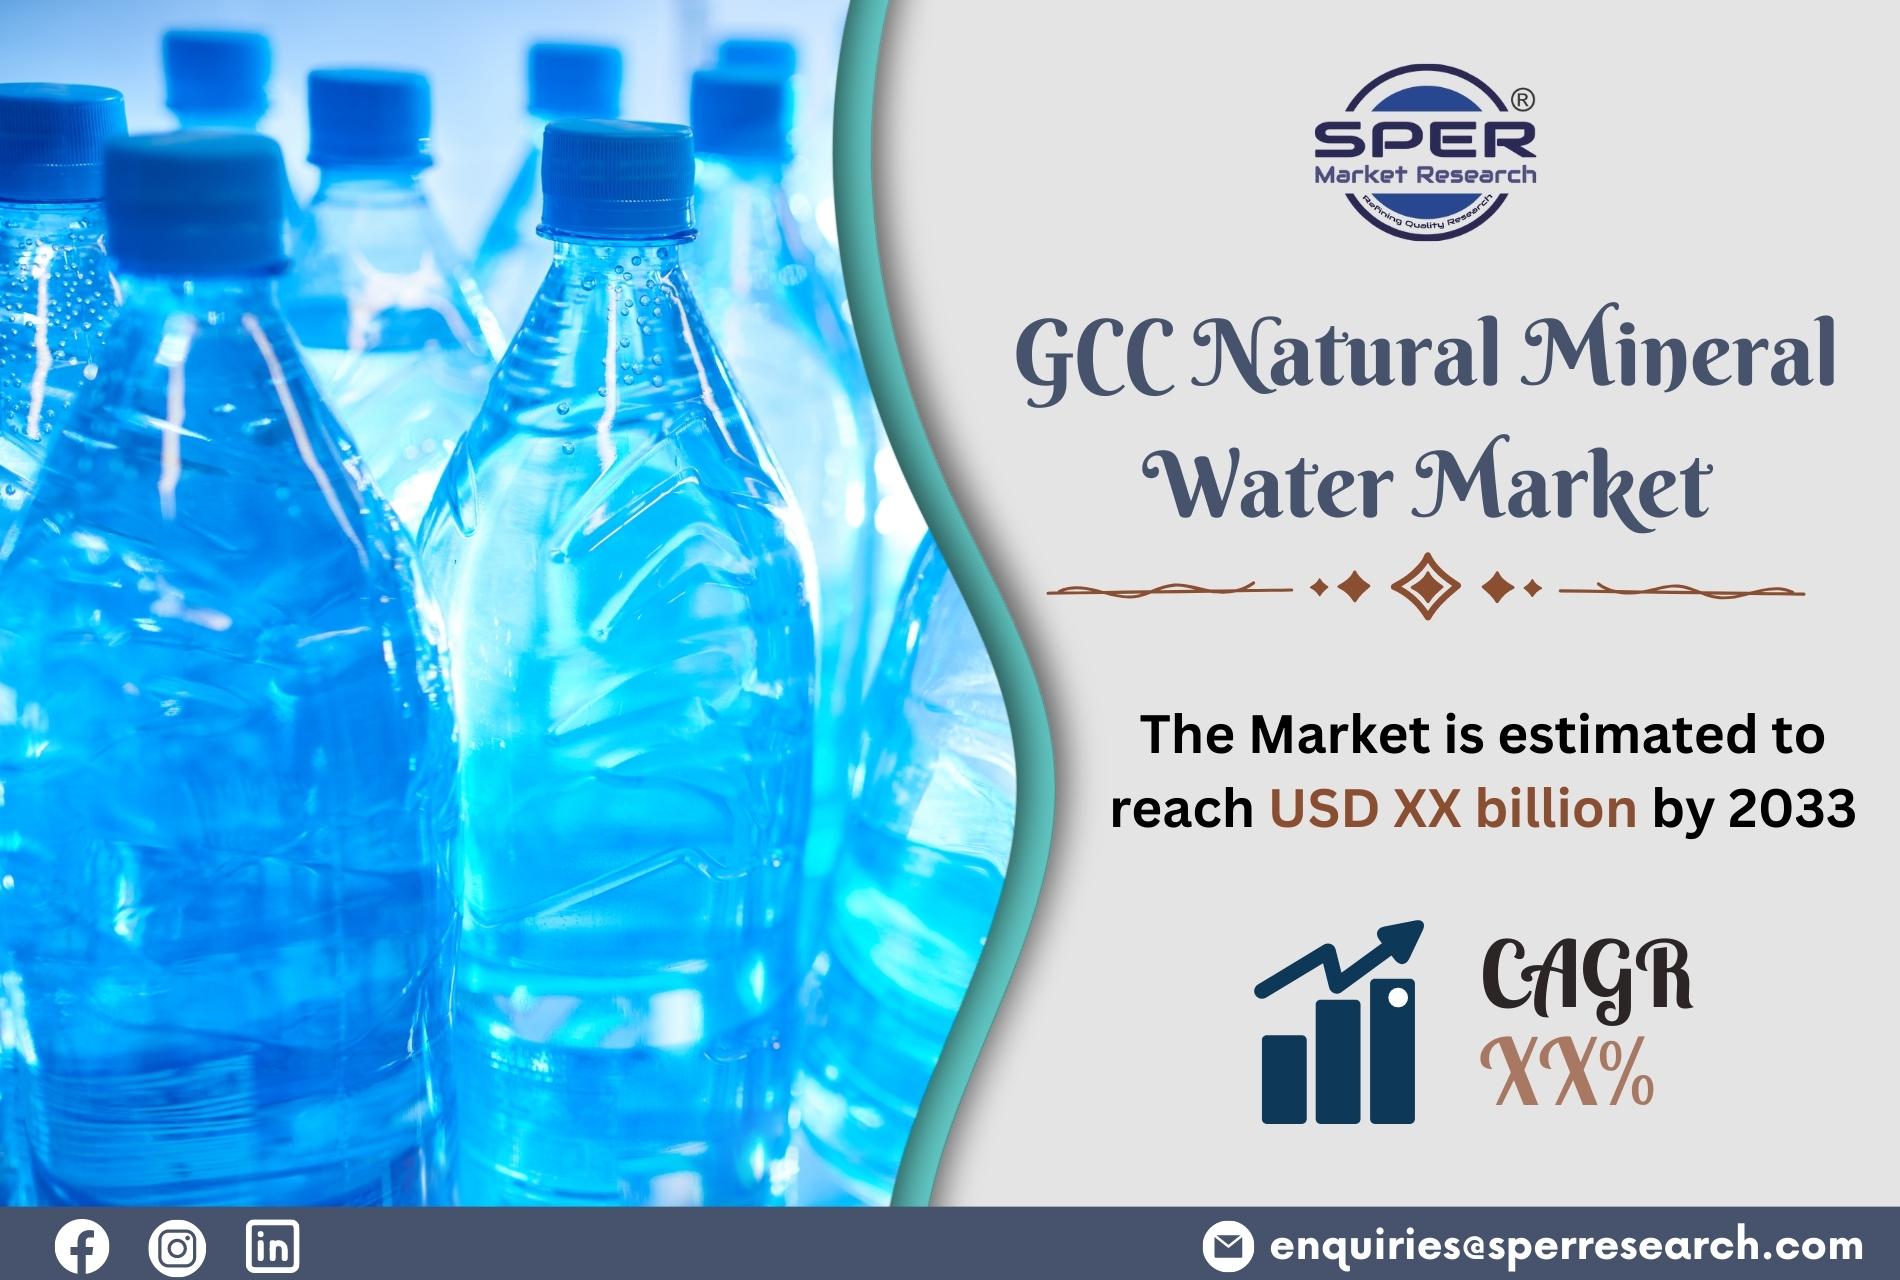 GCC Natural Mineral Water Market Growth, Trends, Scope, Revenue, Future Share